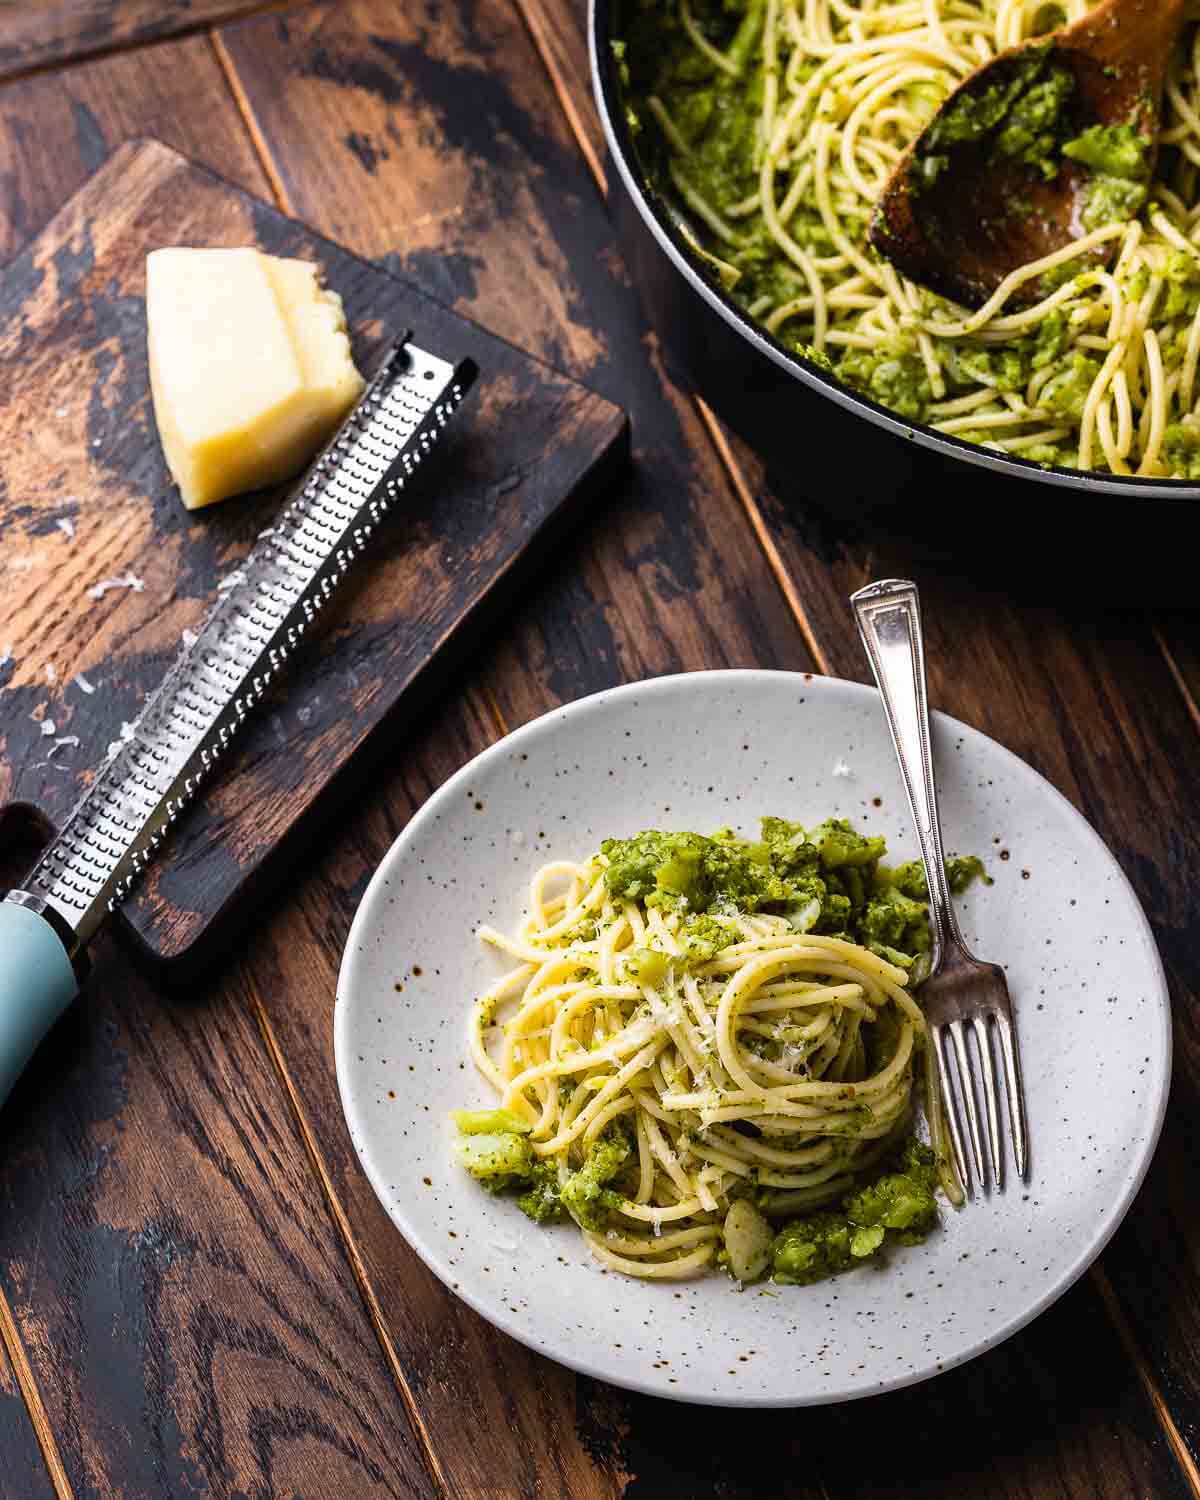 Table with white plate with spaghetti and broccoli along with a large pan and board with a block of Pecorino Romano cheese.